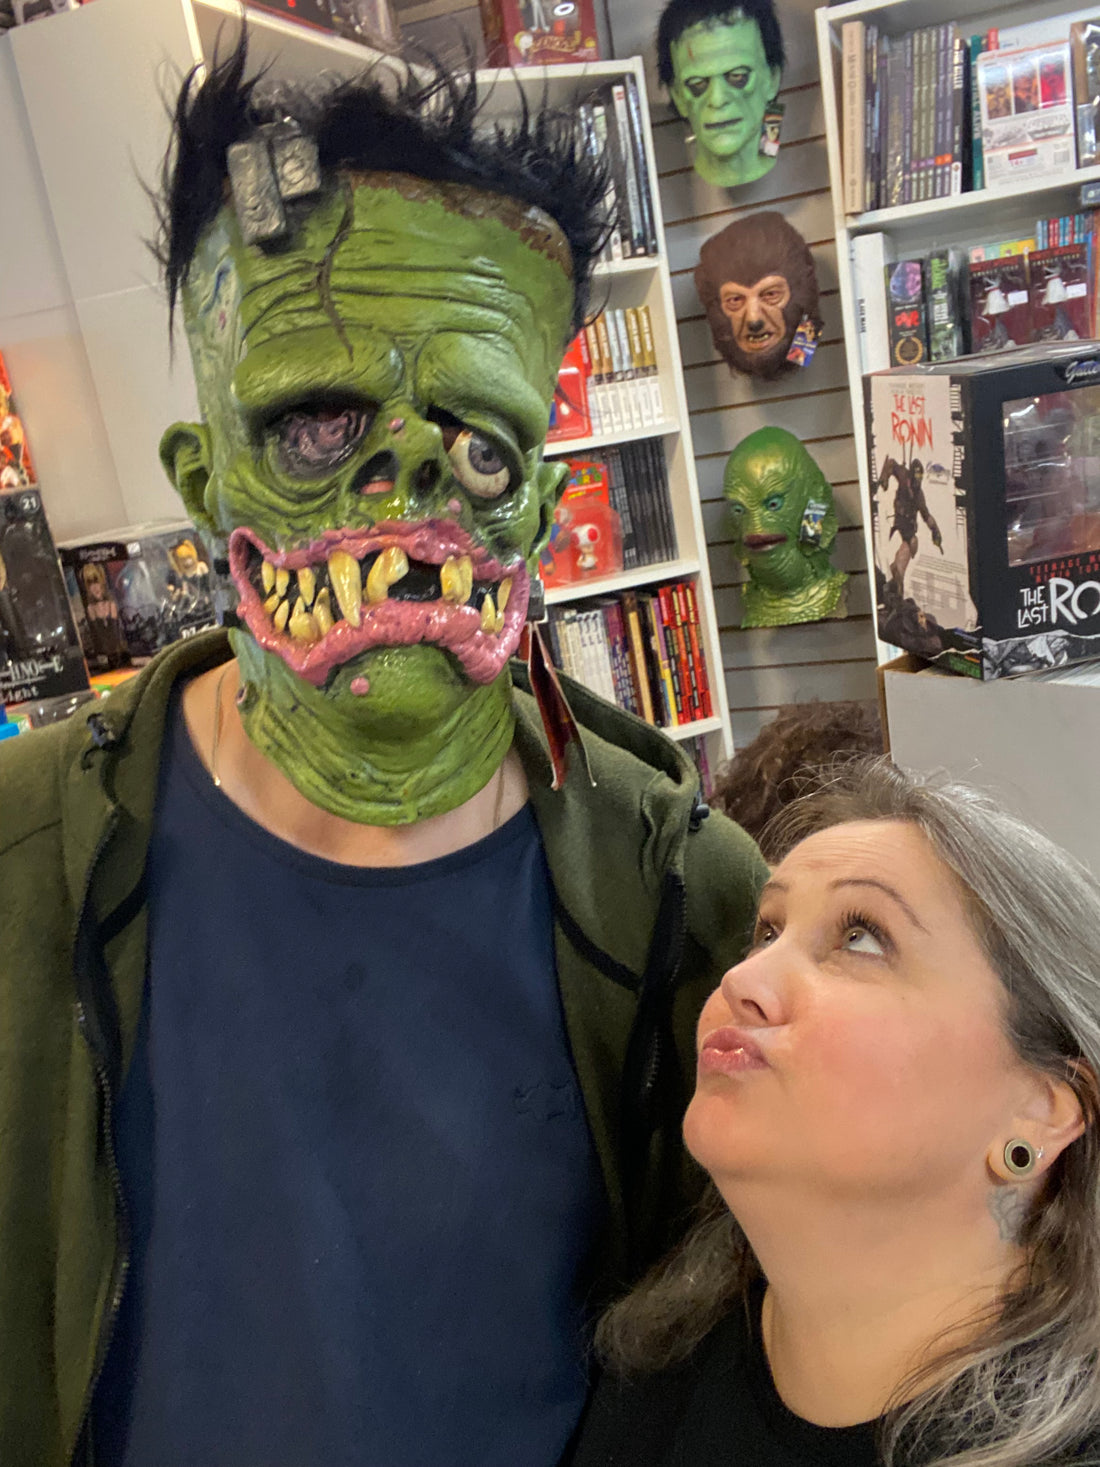 Get Ghoulish: Preparing For Halloween With Masks